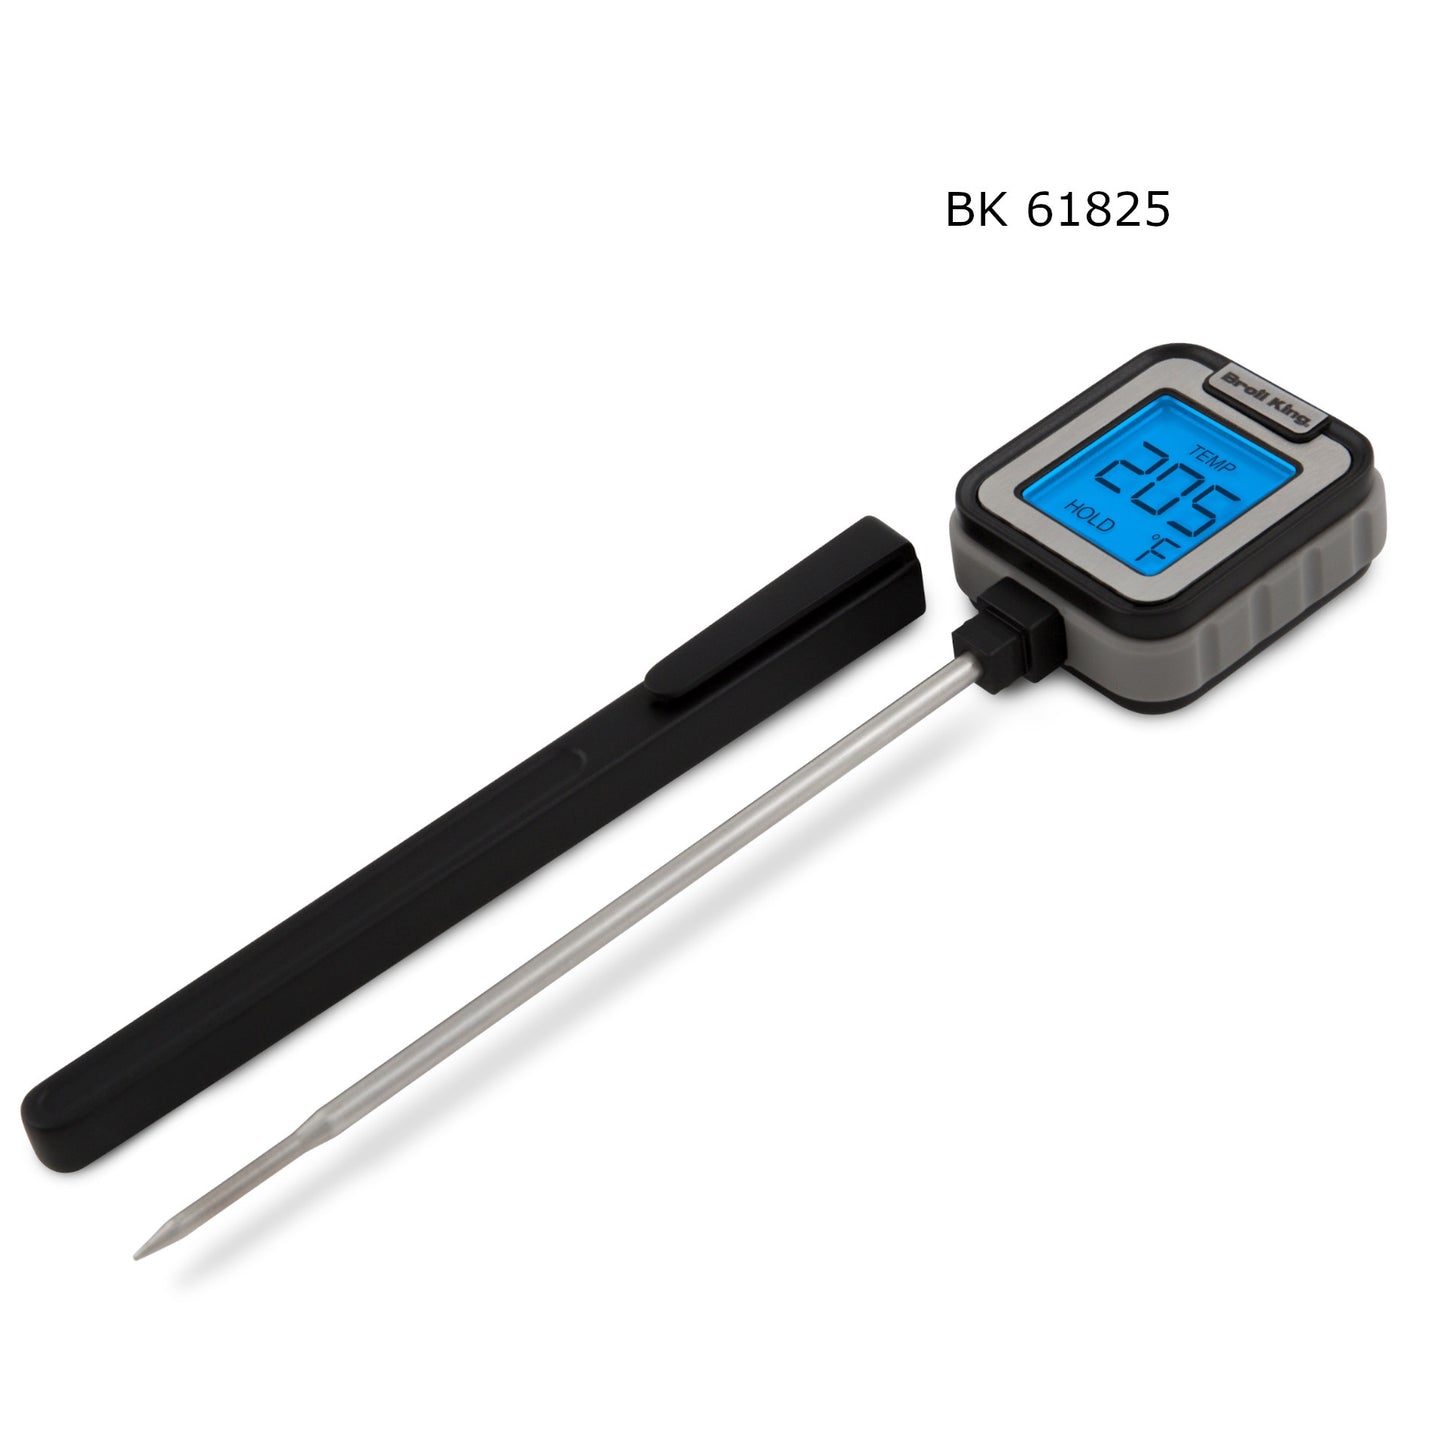 Broil King Instant Read Pocket Thermometer